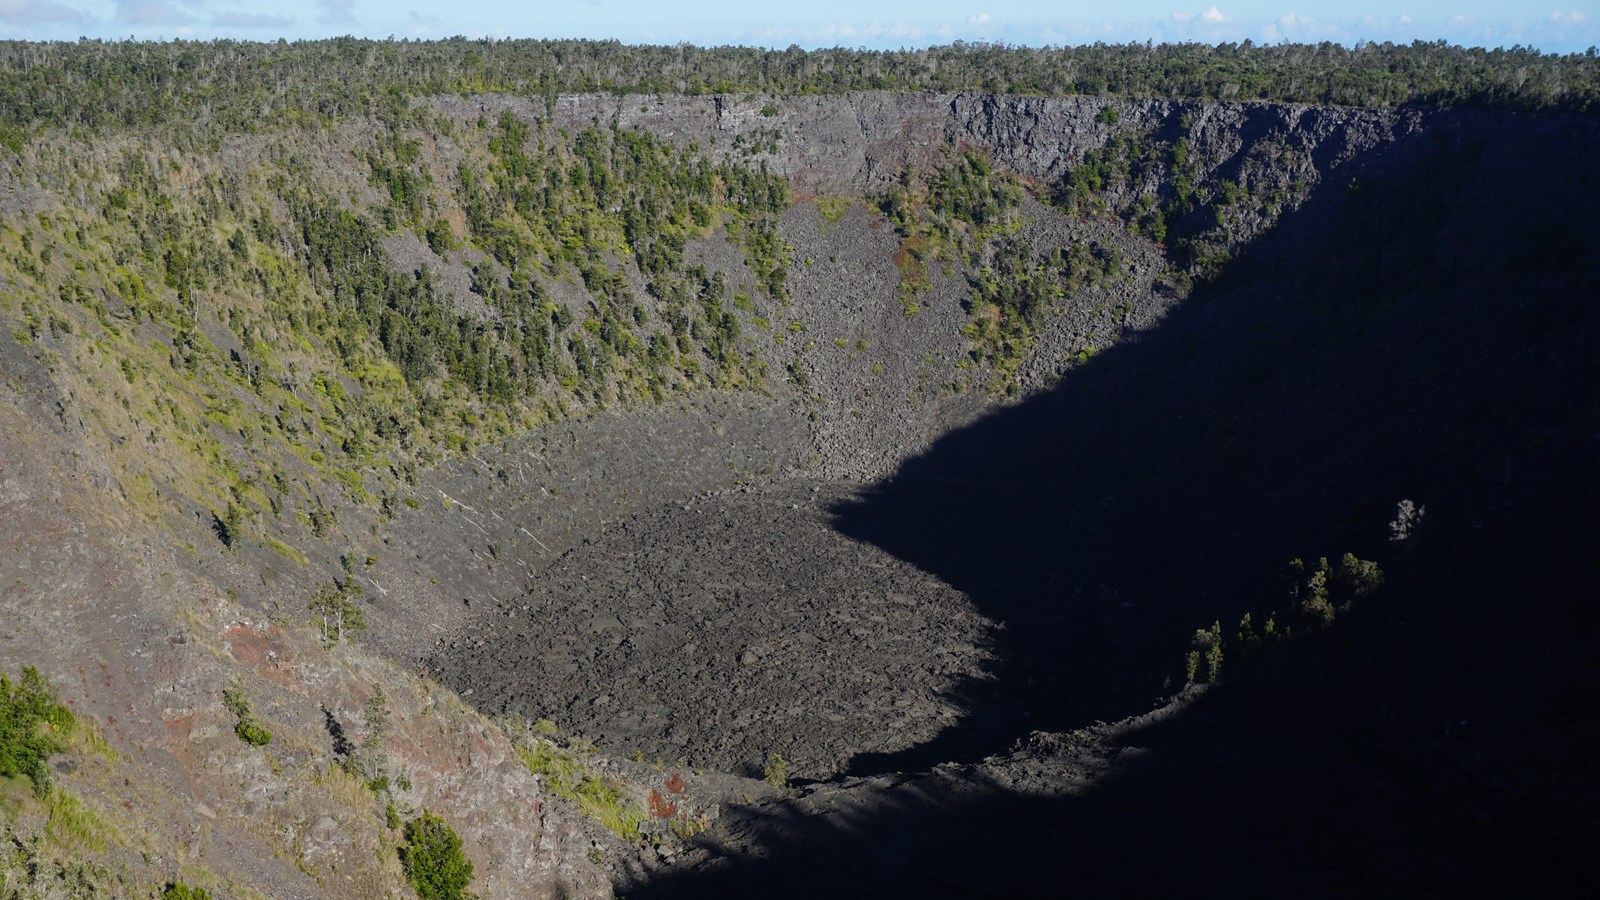 A large volcanic crater with a barren bottom